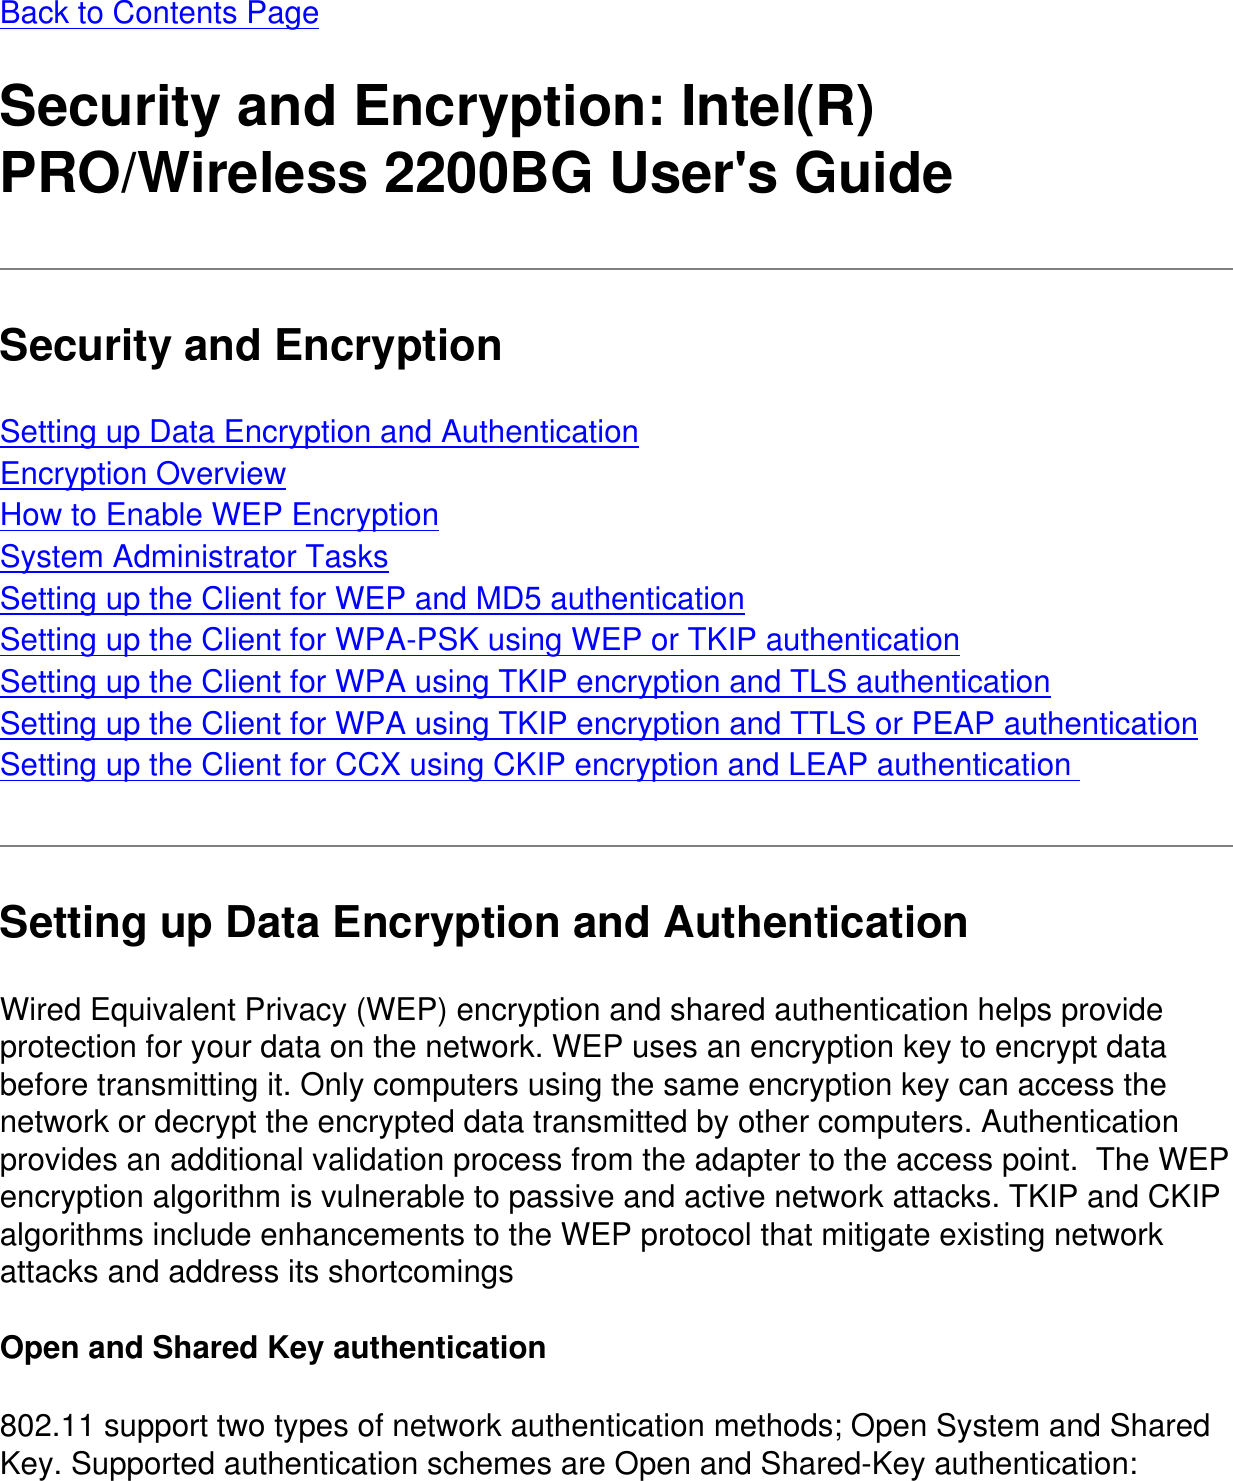 Back to Contents Page Security and Encryption: Intel(R) PRO/Wireless 2200BG User&apos;s GuideSecurity and EncryptionSetting up Data Encryption and AuthenticationEncryption OverviewHow to Enable WEP EncryptionSystem Administrator TasksSetting up the Client for WEP and MD5 authenticationSetting up the Client for WPA-PSK using WEP or TKIP authenticationSetting up the Client for WPA using TKIP encryption and TLS authenticationSetting up the Client for WPA using TKIP encryption and TTLS or PEAP authenticationSetting up the Client for CCX using CKIP encryption and LEAP authentication Setting up Data Encryption and AuthenticationWired Equivalent Privacy (WEP) encryption and shared authentication helps provide protection for your data on the network. WEP uses an encryption key to encrypt data before transmitting it. Only computers using the same encryption key can access the network or decrypt the encrypted data transmitted by other computers. Authentication provides an additional validation process from the adapter to the access point.  The WEP encryption algorithm is vulnerable to passive and active network attacks. TKIP and CKIP algorithms include enhancements to the WEP protocol that mitigate existing network attacks and address its shortcomings Open and Shared Key authentication802.11 support two types of network authentication methods; Open System and Shared Key. Supported authentication schemes are Open and Shared-Key authentication: